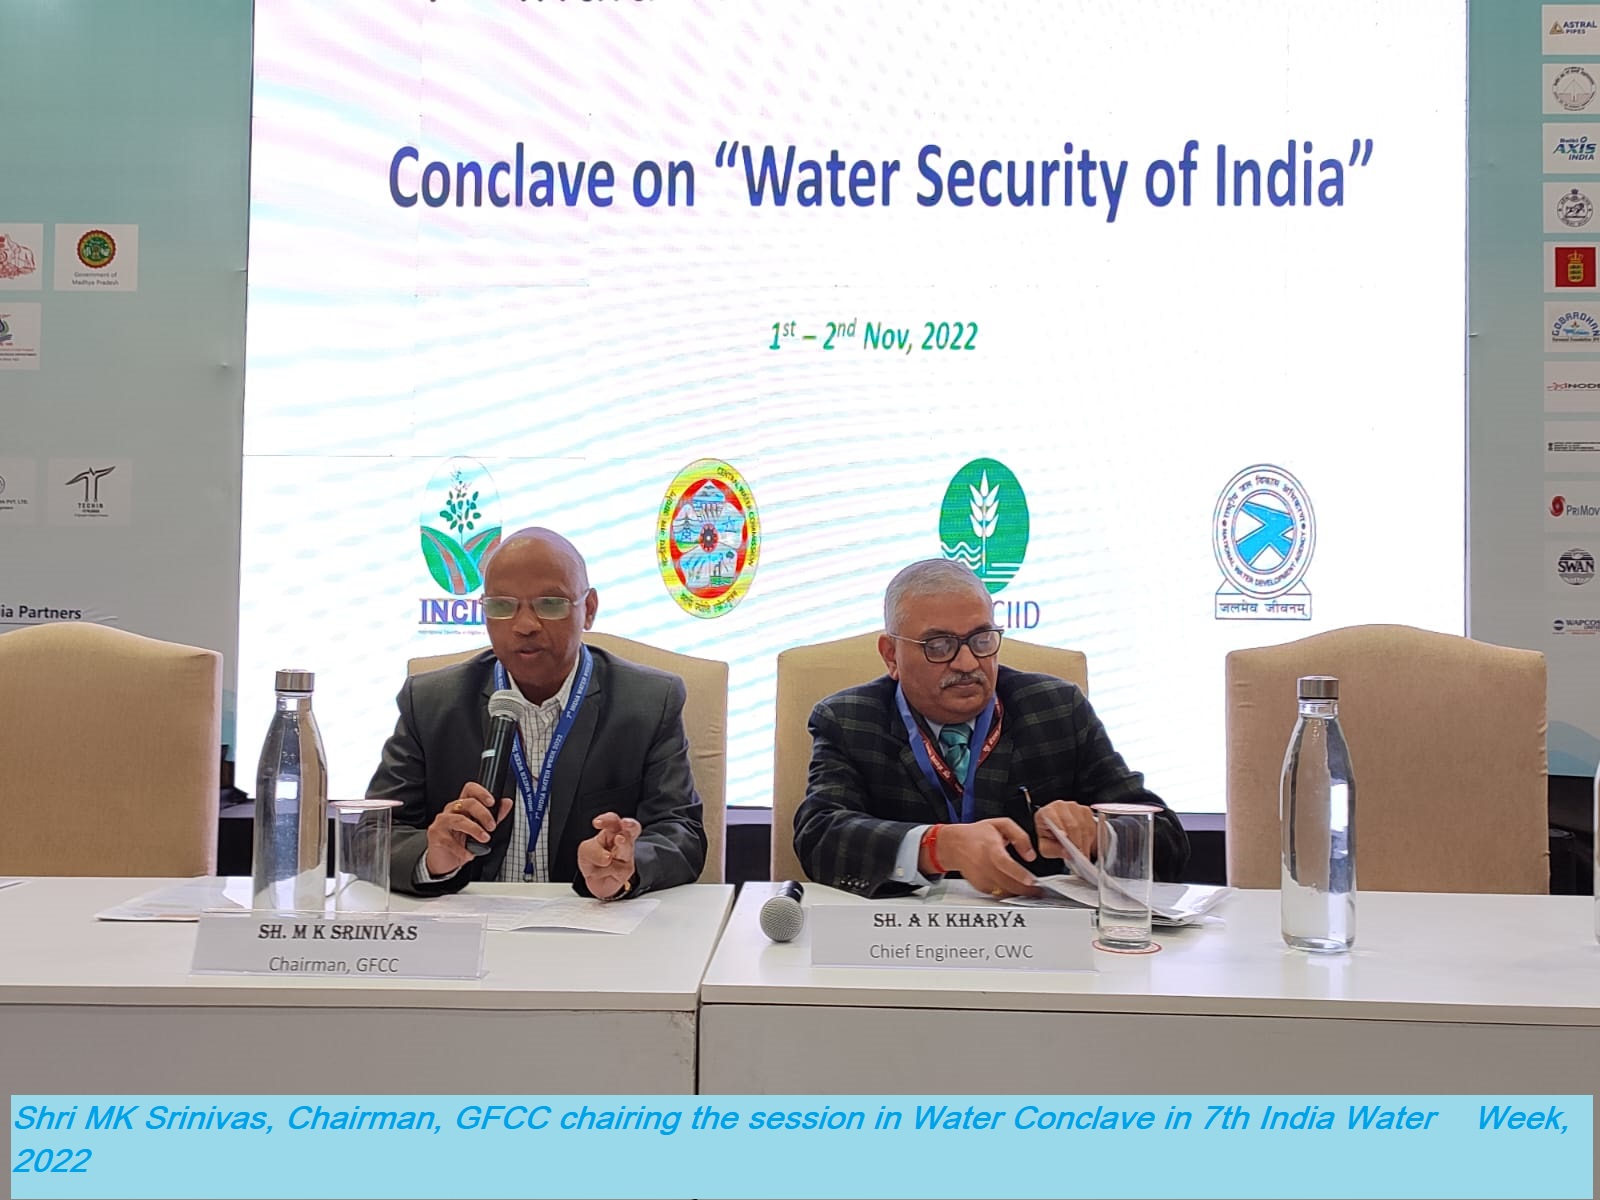 Shri MK Srinivas, Chairman, GFCC chairing the session in Water Conclave in 7th India Water Week, 2022